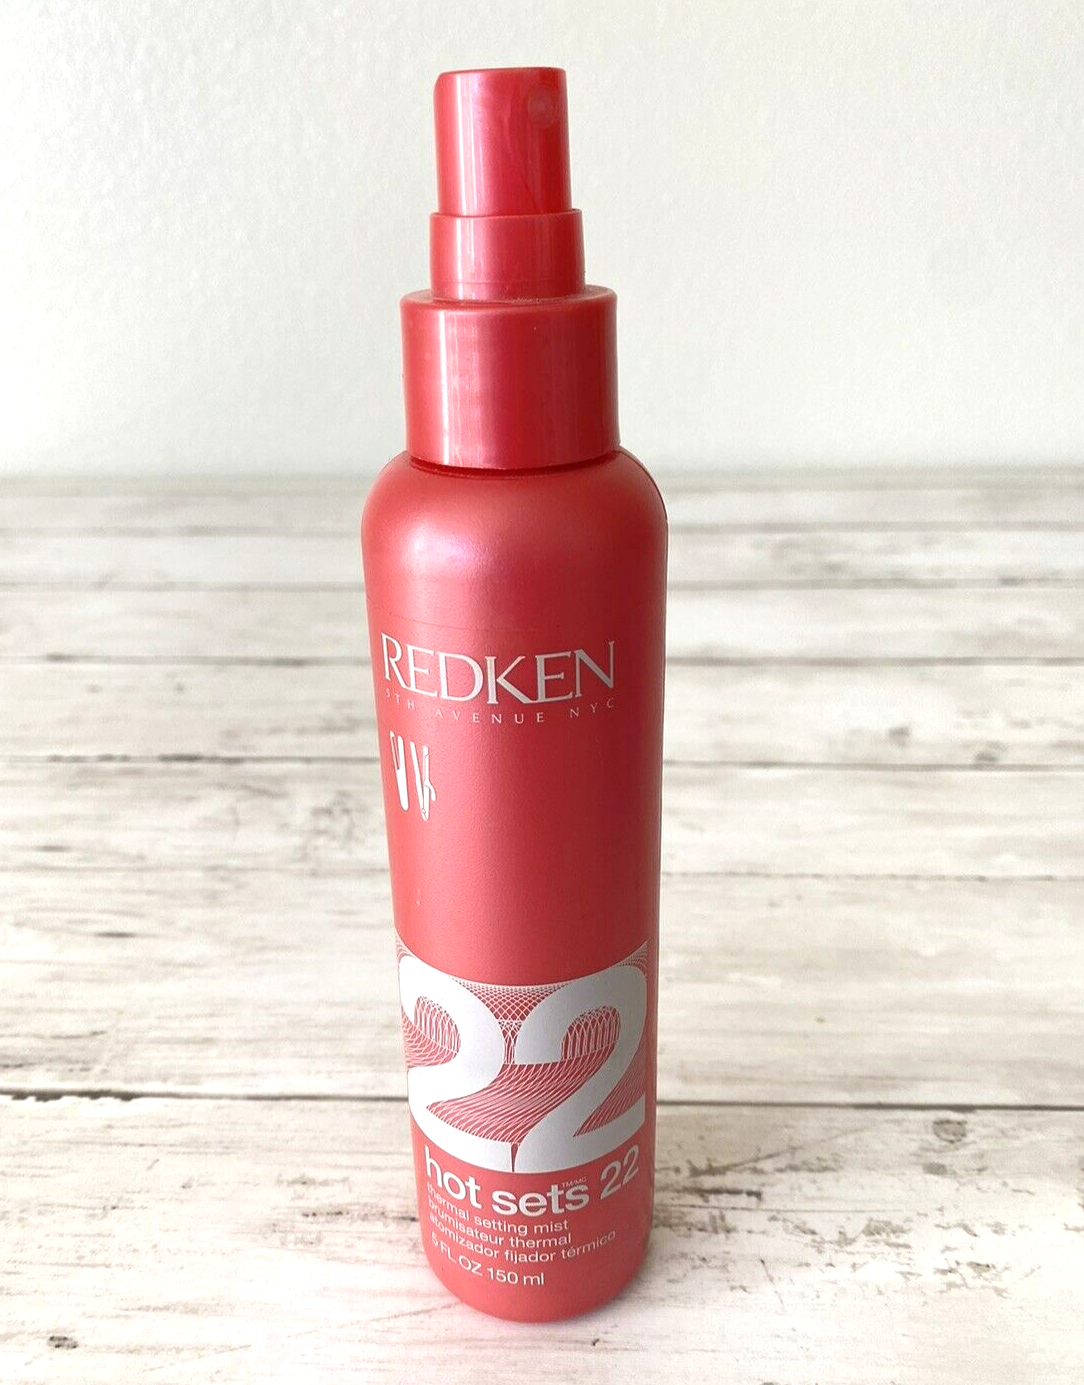 REDKEN Hot Sets 22 Thermal Setting Mist High Hold 5.0 oz No Cap-New - $23.33